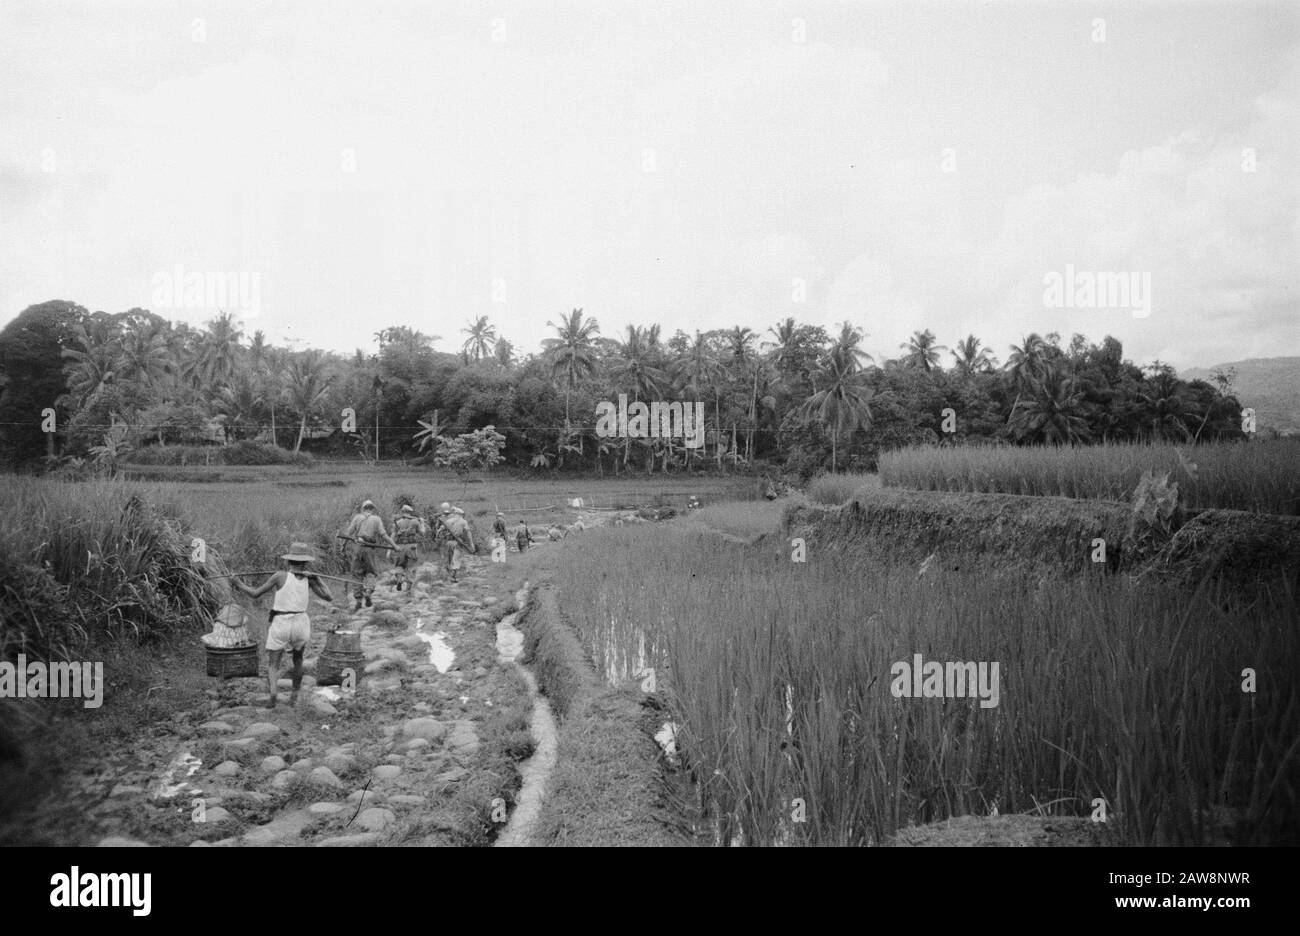 Syzygium near Buitenzorg  Patrol in the area of Syzygium near Buitenzorg. The path of the patrol carries them through landscapes with ripening paddy, promise of wealth Date: February 1, 1949 Location: Buitenzorg, Indonesia, Java, Dutch East Indies Stock Photo